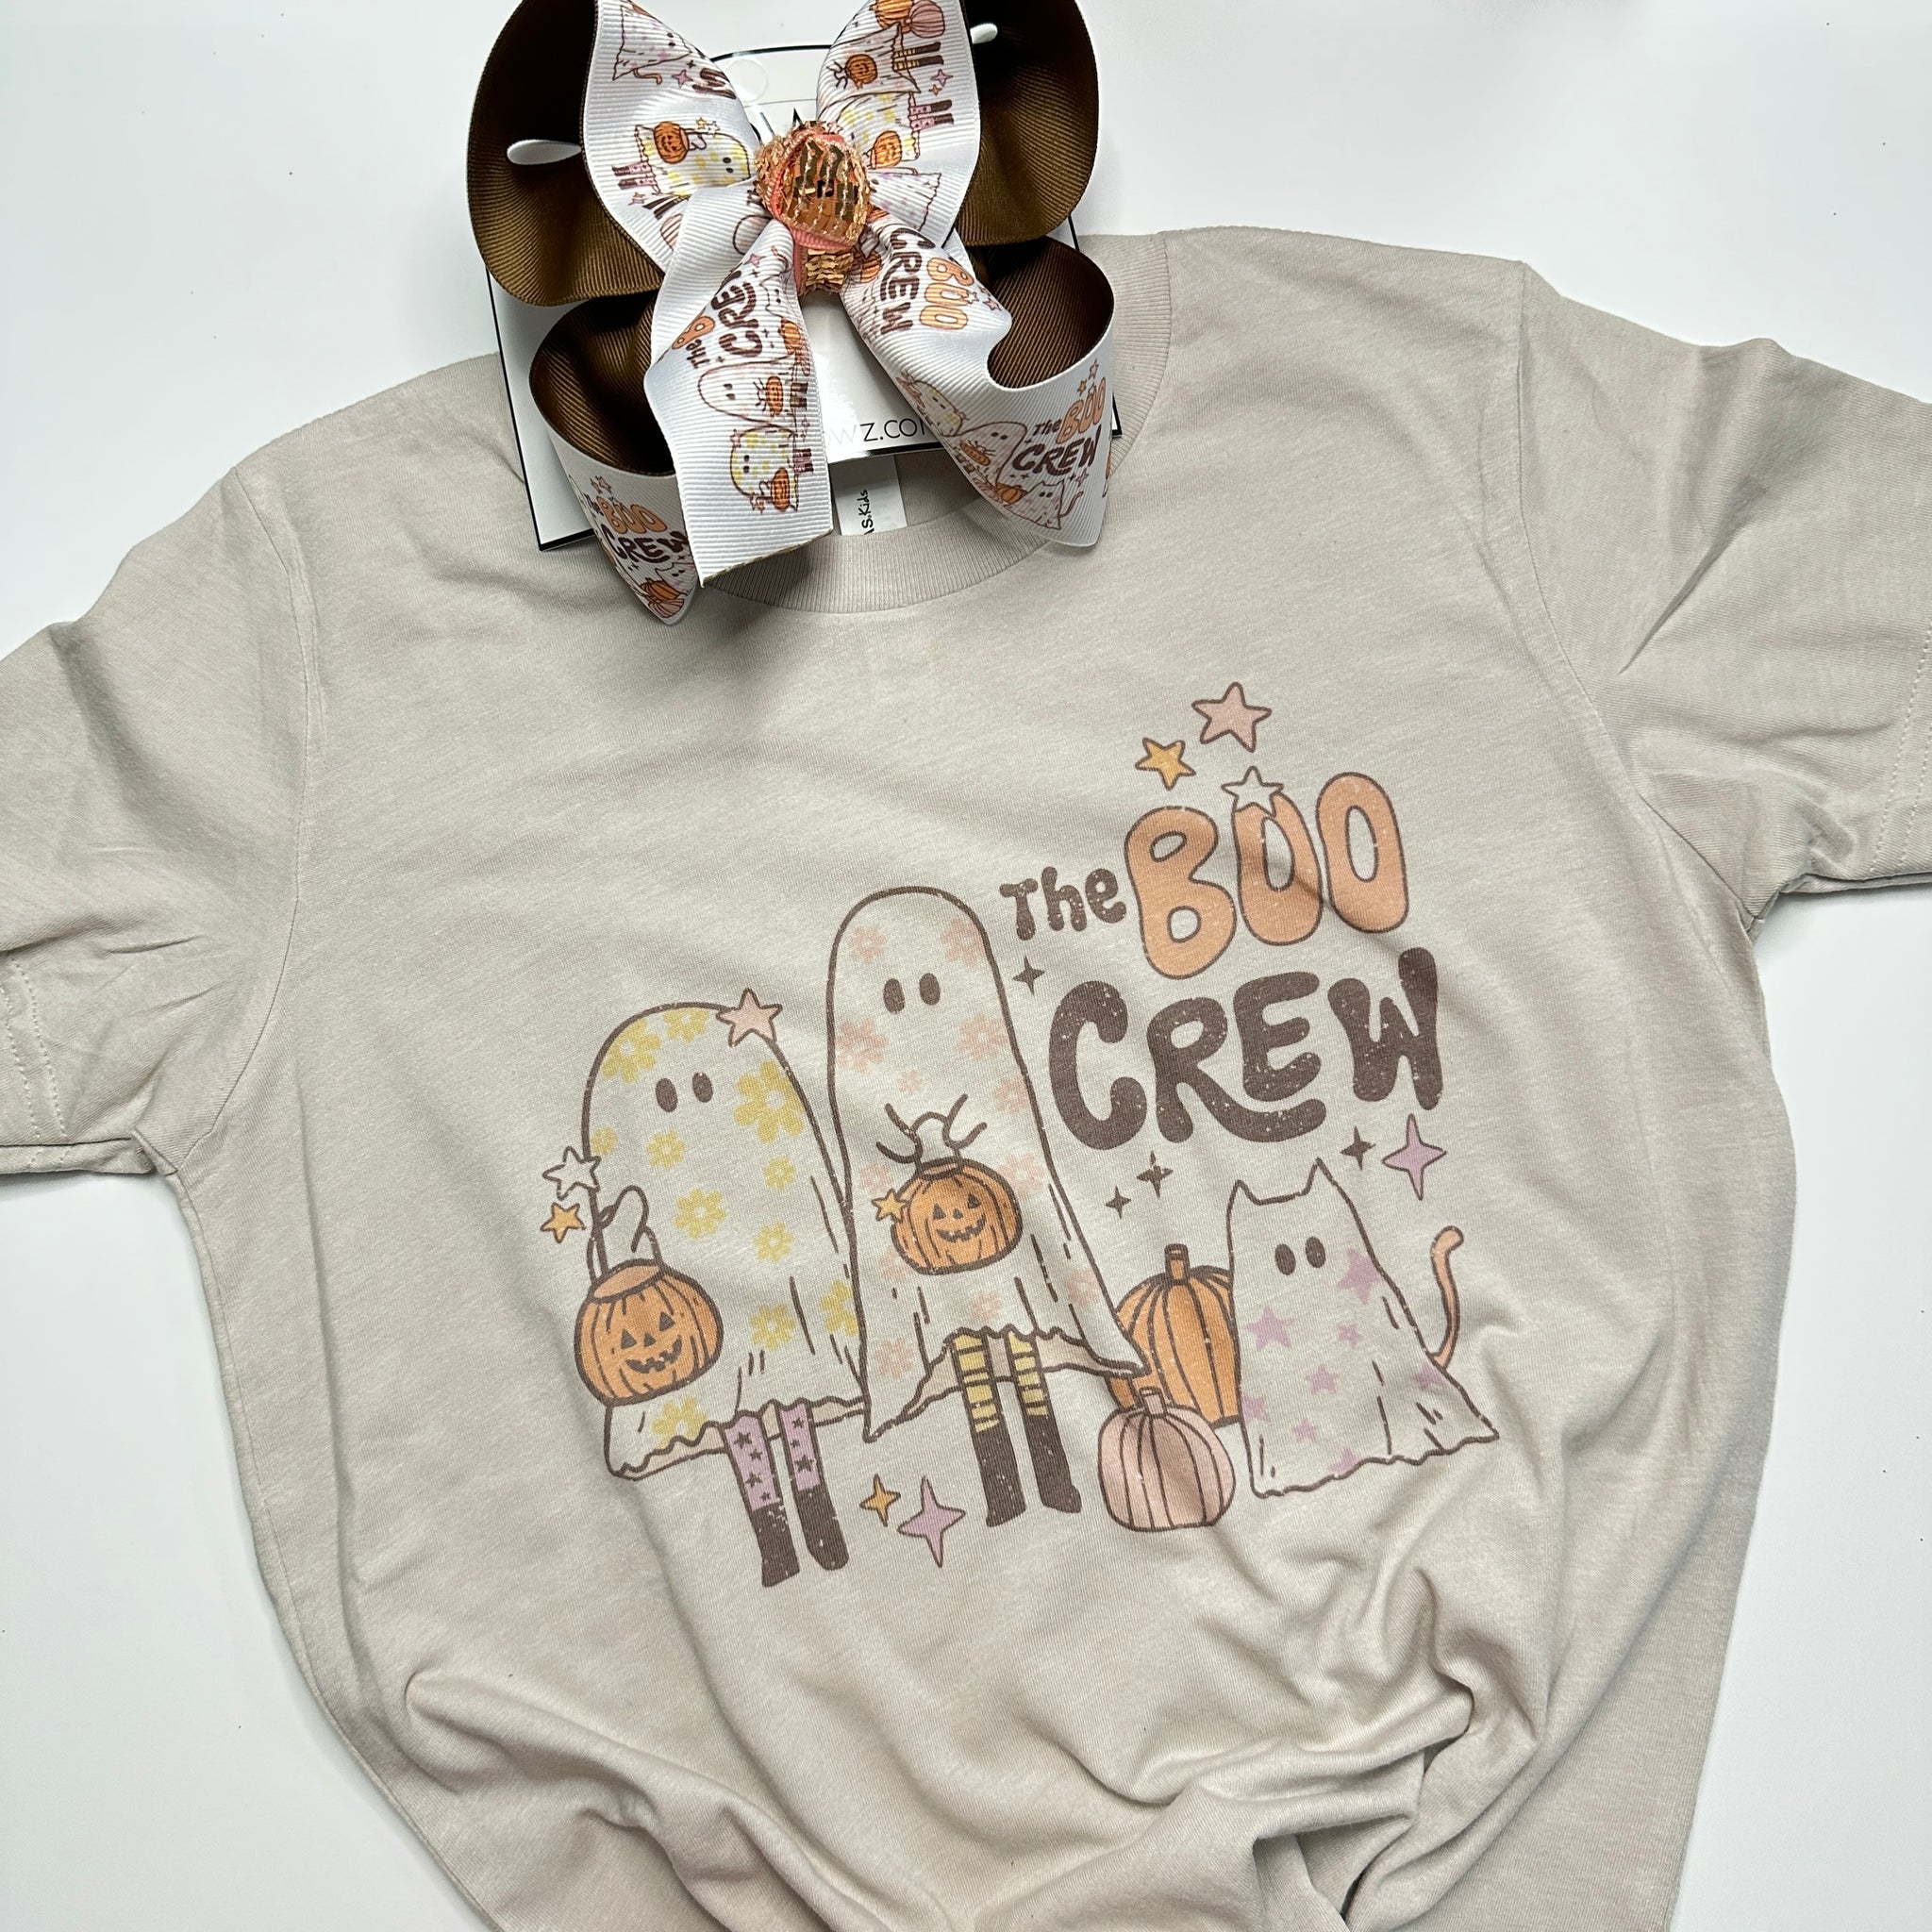 The Boo Crew  Tee and Matching Hair bow Combo ~ Matching Hairbow and T-shirt ~ Halloween Spooky Season  ~ Exclusive iBOWZ design